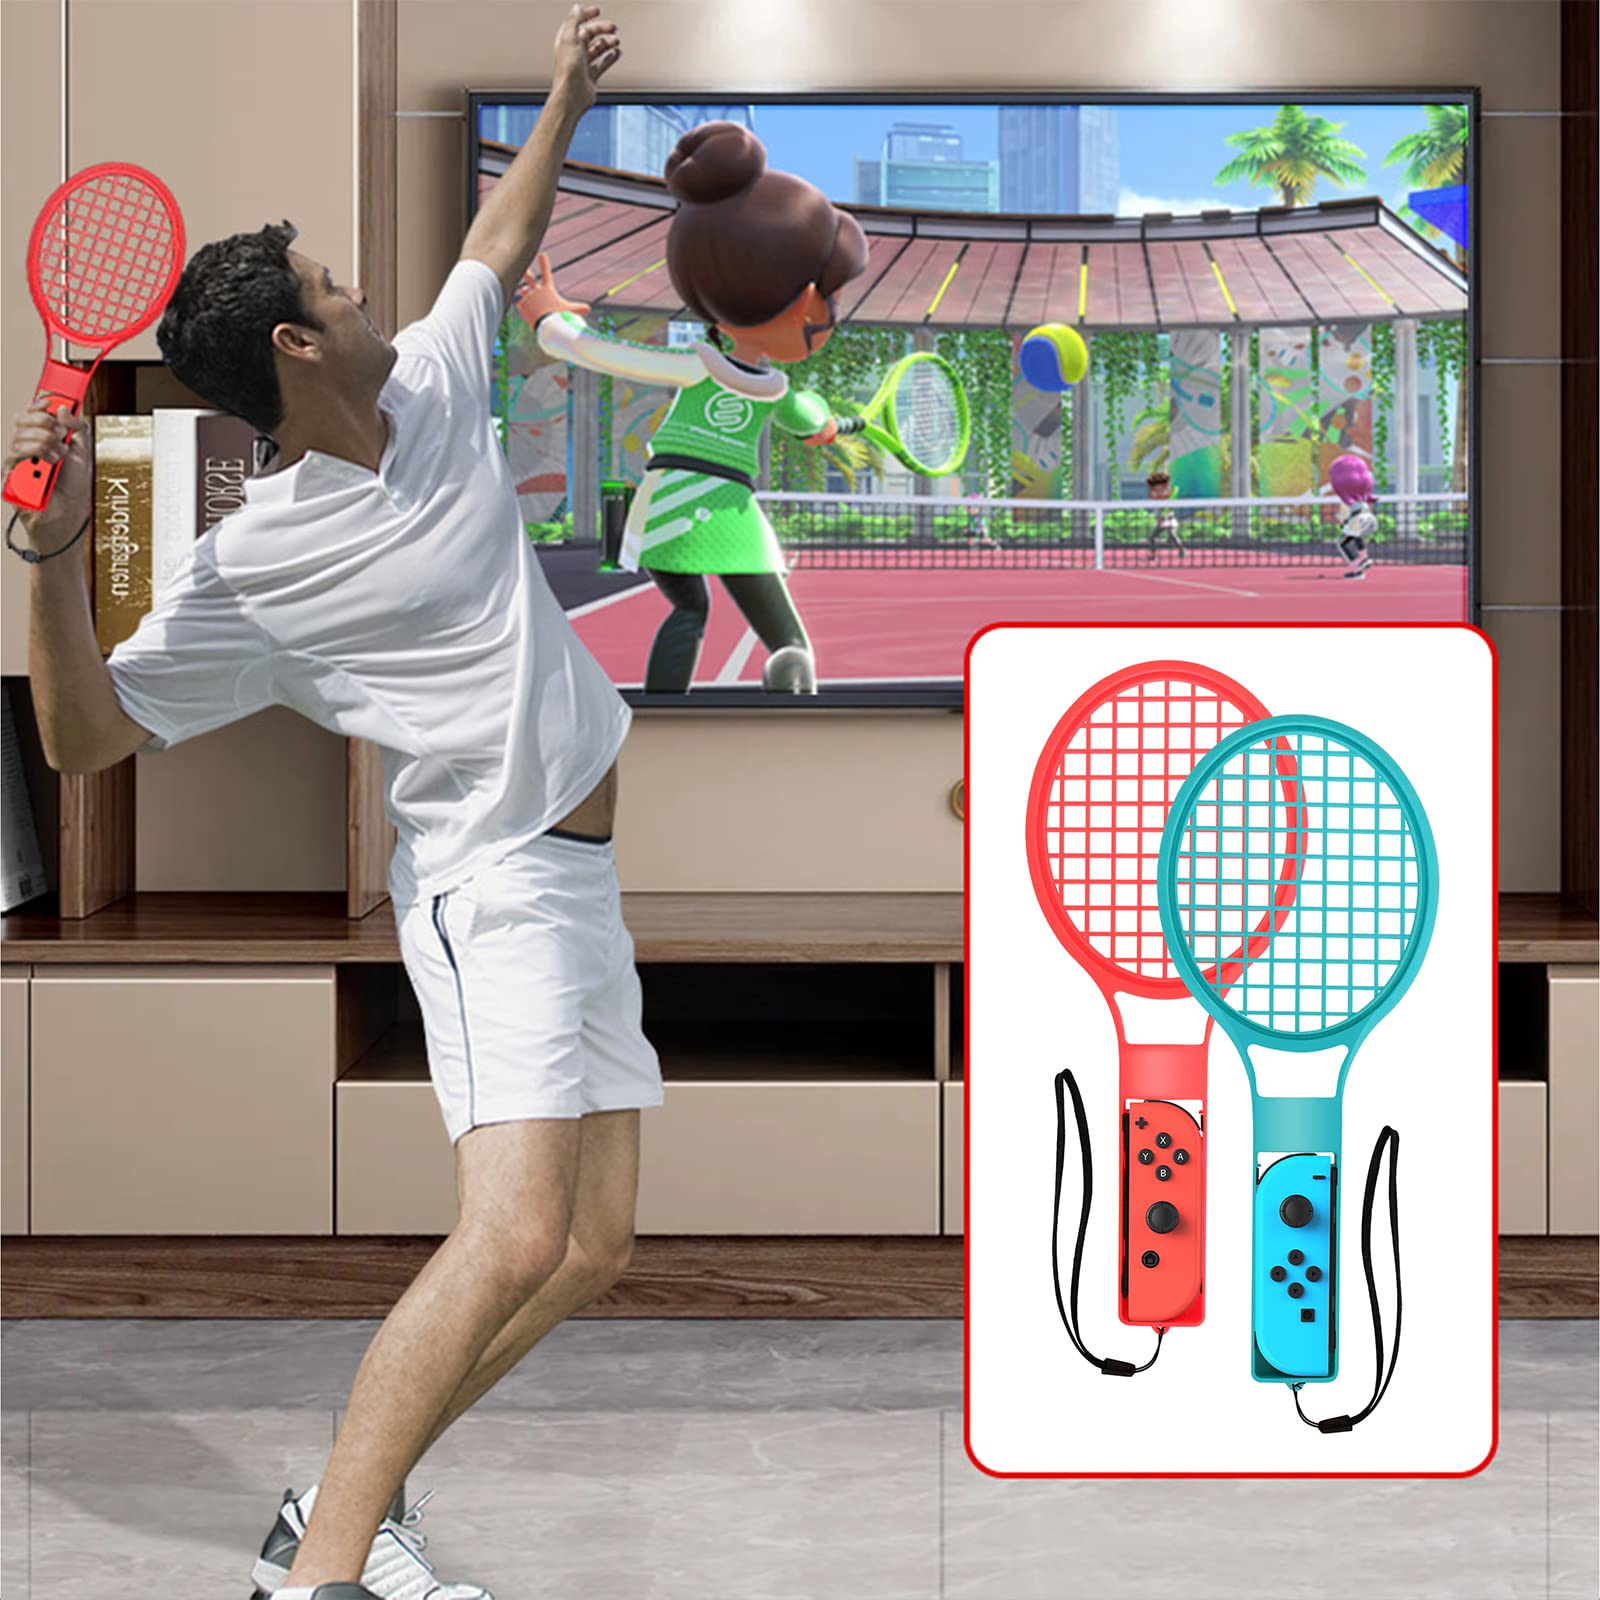 2023 Nintendo Switch Sports Accessories Bundle -10 in 1 Family Accessories Kit for Switch Sports Games:Tennis Rackets,Golf Clubs for Mario Golf Super Rush,Soccer Leg Straps,Sword Grips for Chambara Game,Wrist Bands